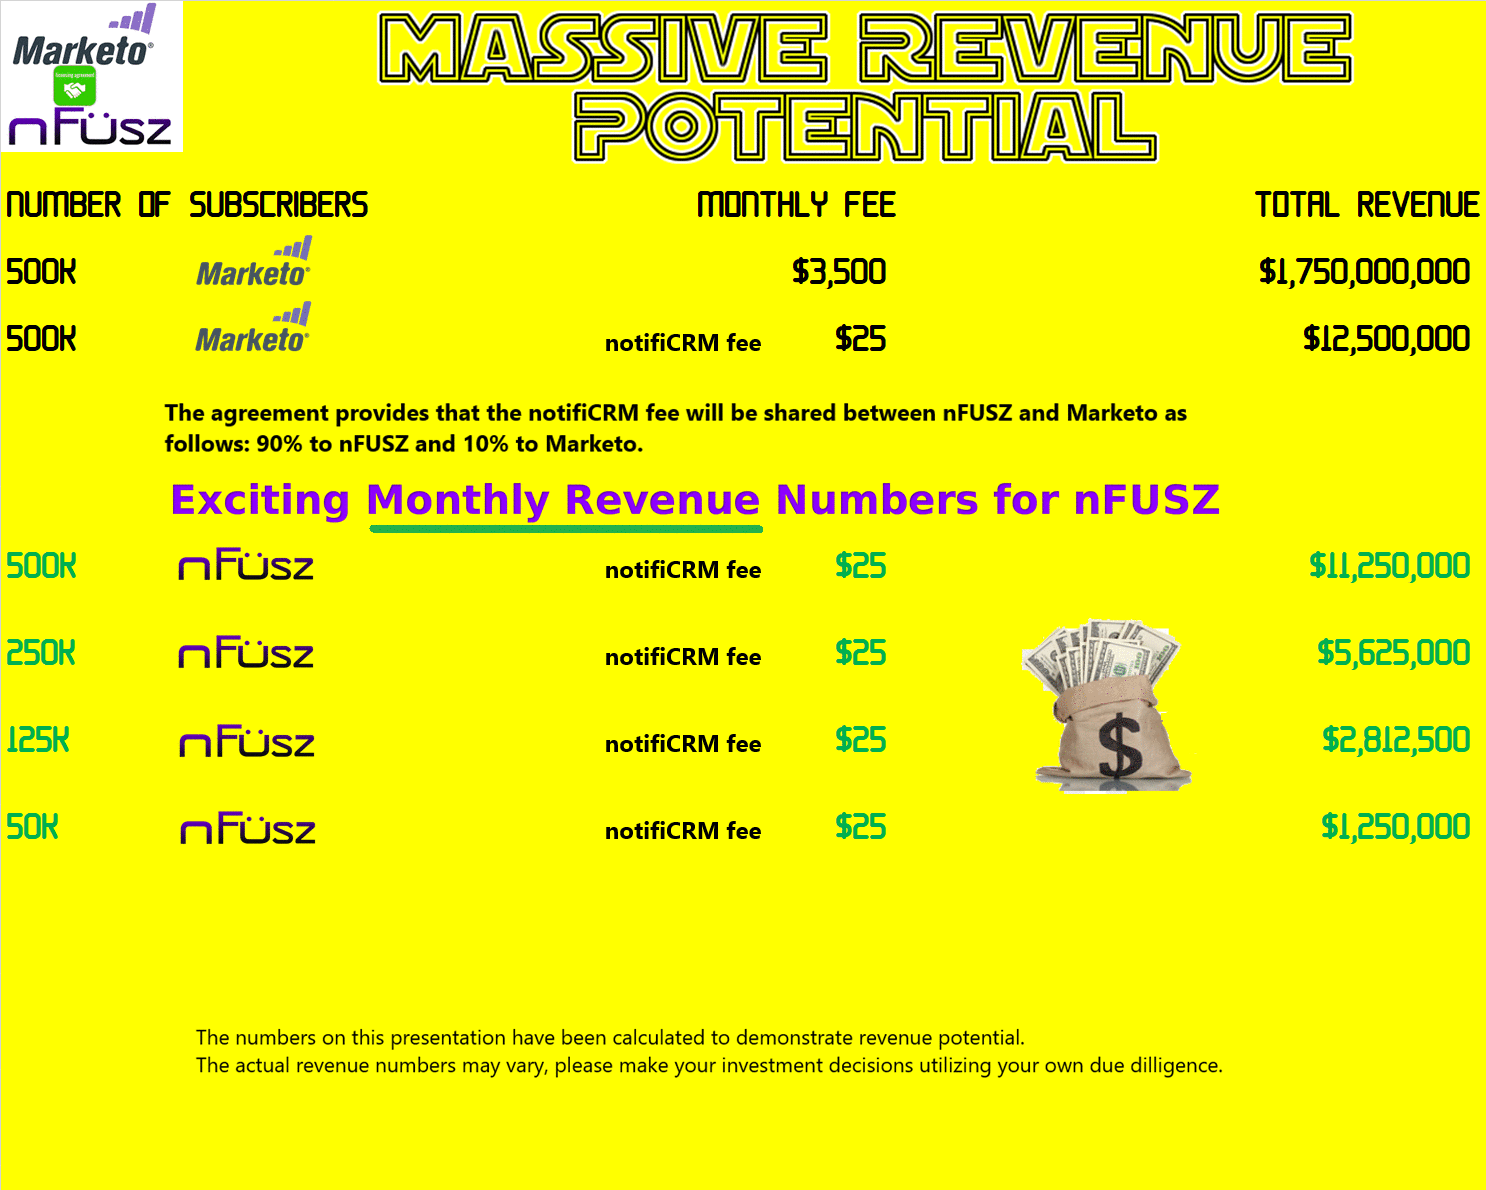 588699806_yellowrevenue02.png